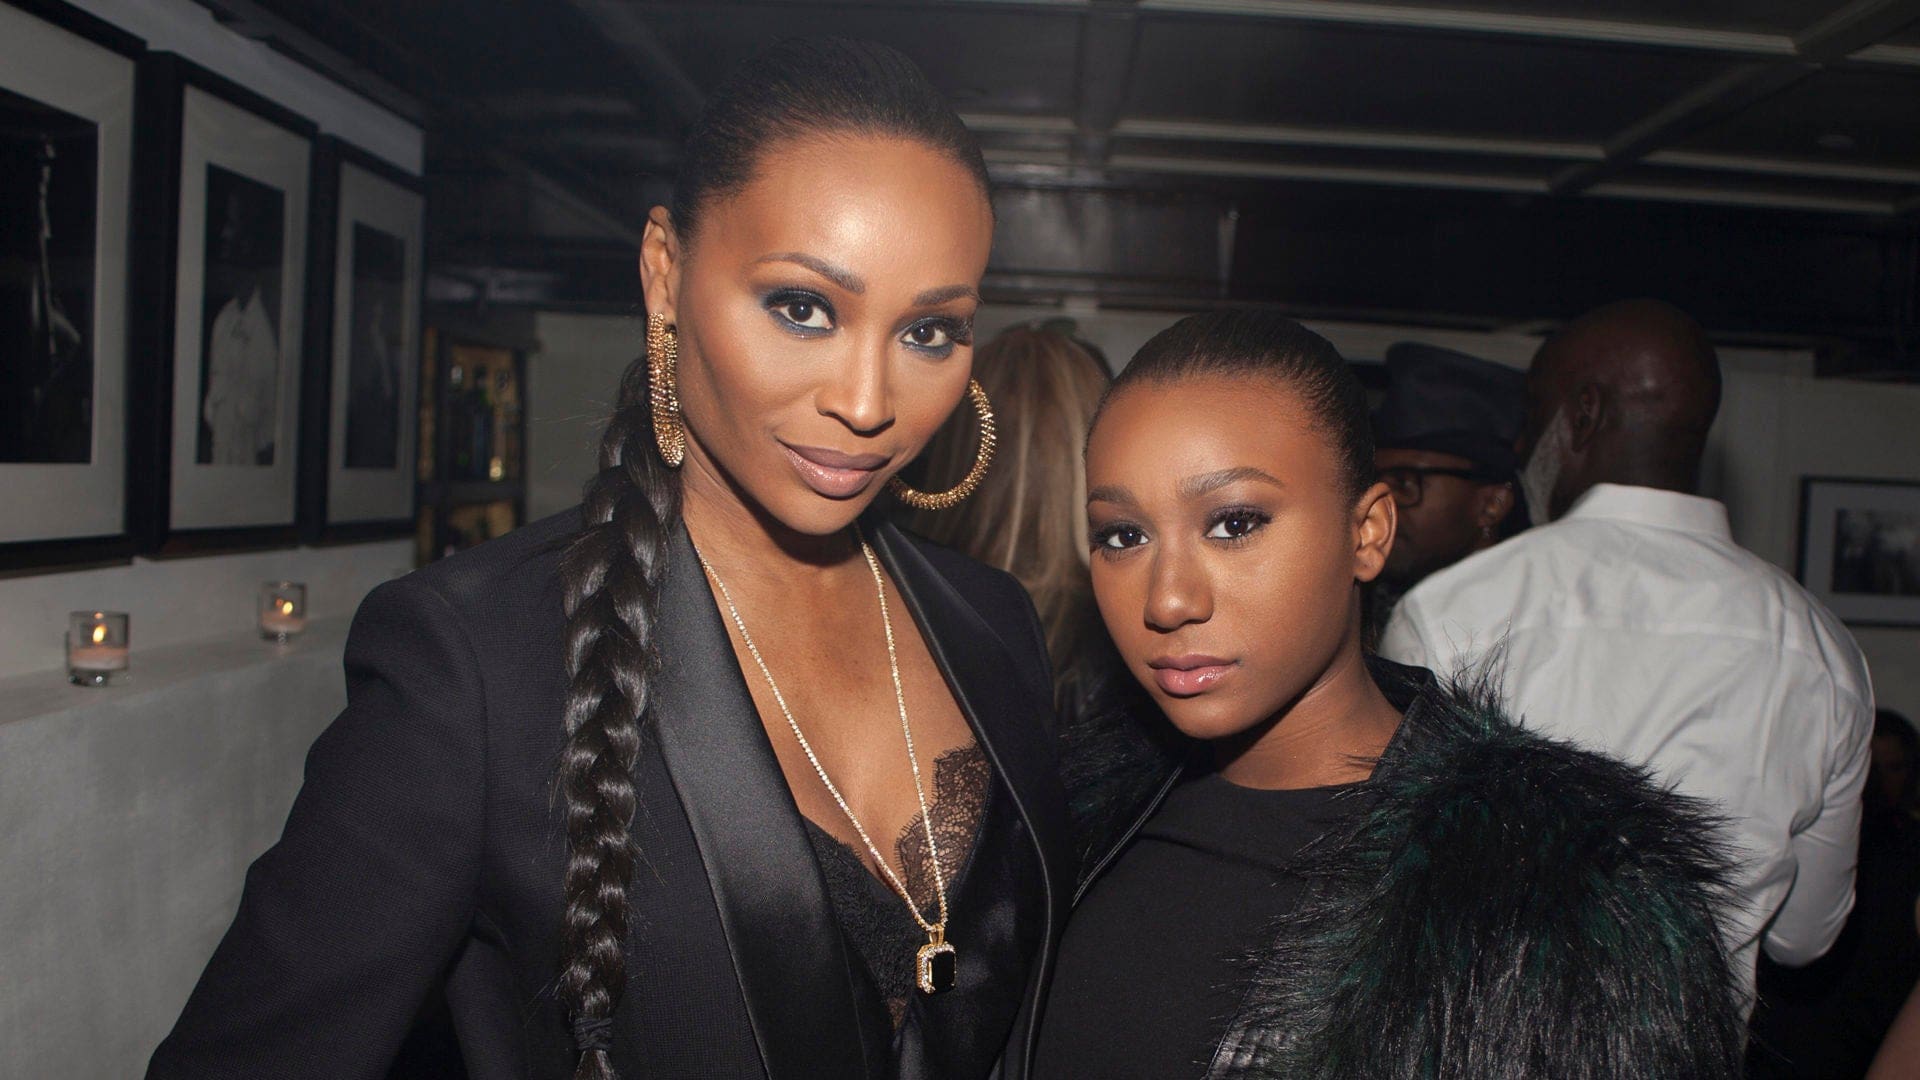 Cynthia Bailey Films Another Video With Her Daughter, Noelle Robinson